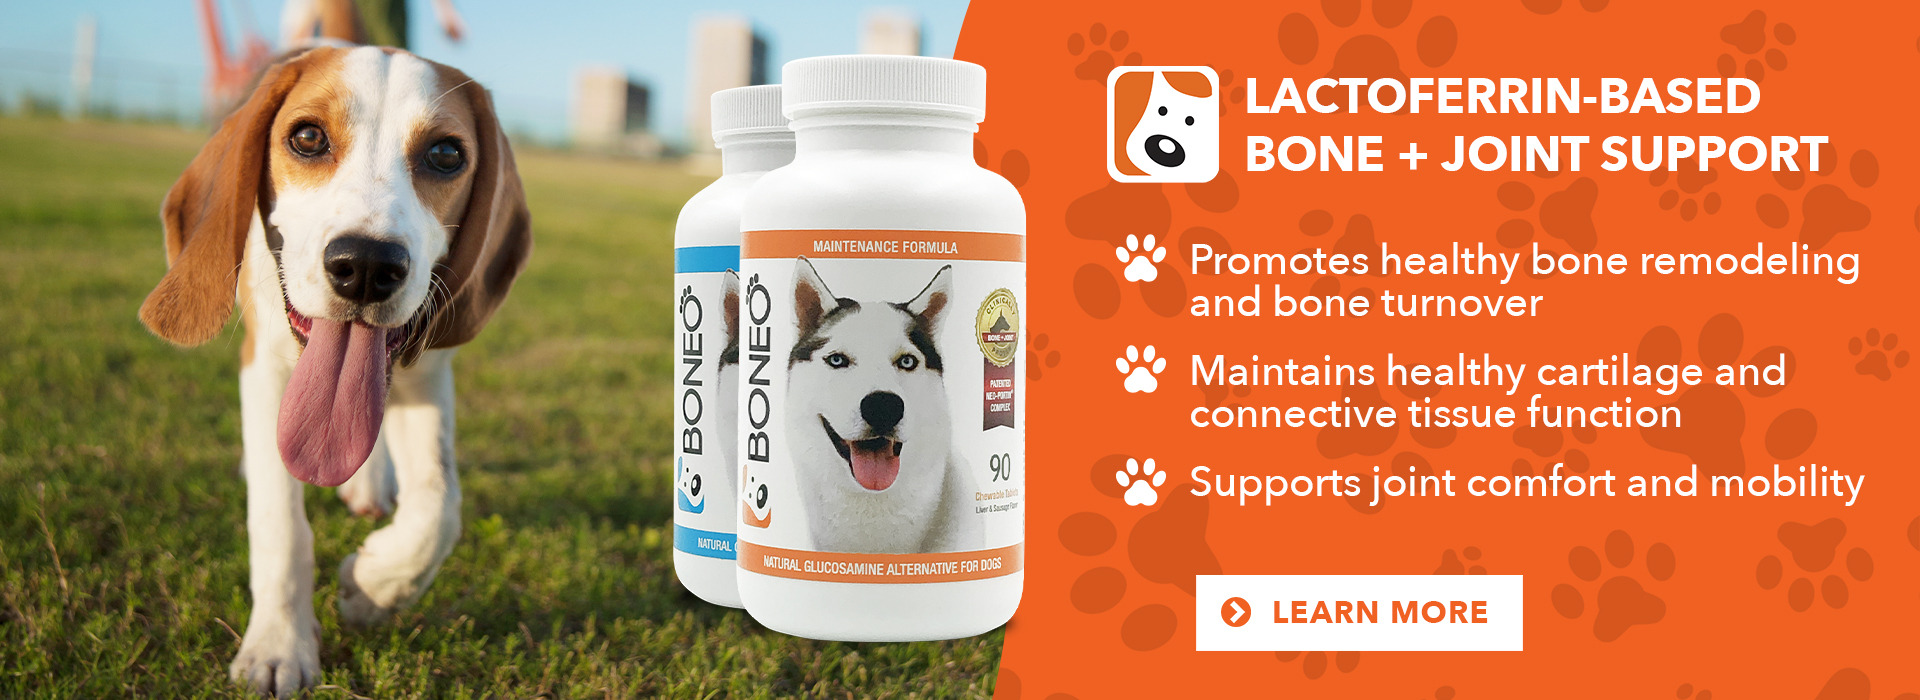 Boneo Canine - Dog Bone and Joint Support Supplement